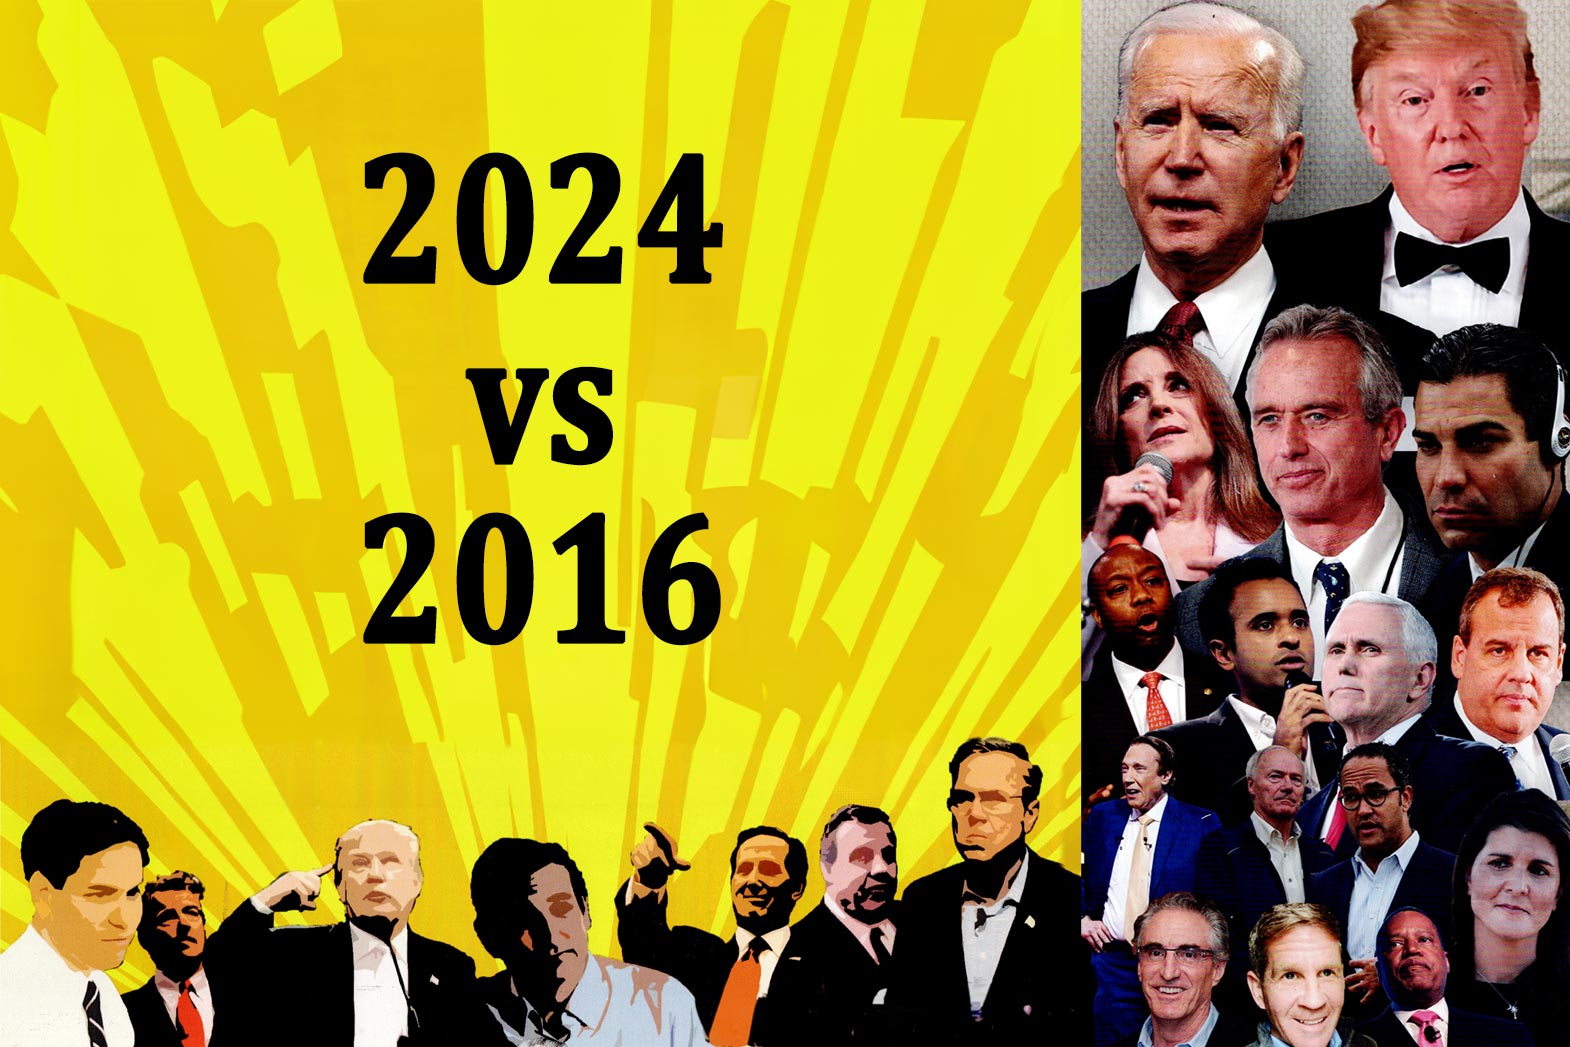 Comparing 2024 to 2016